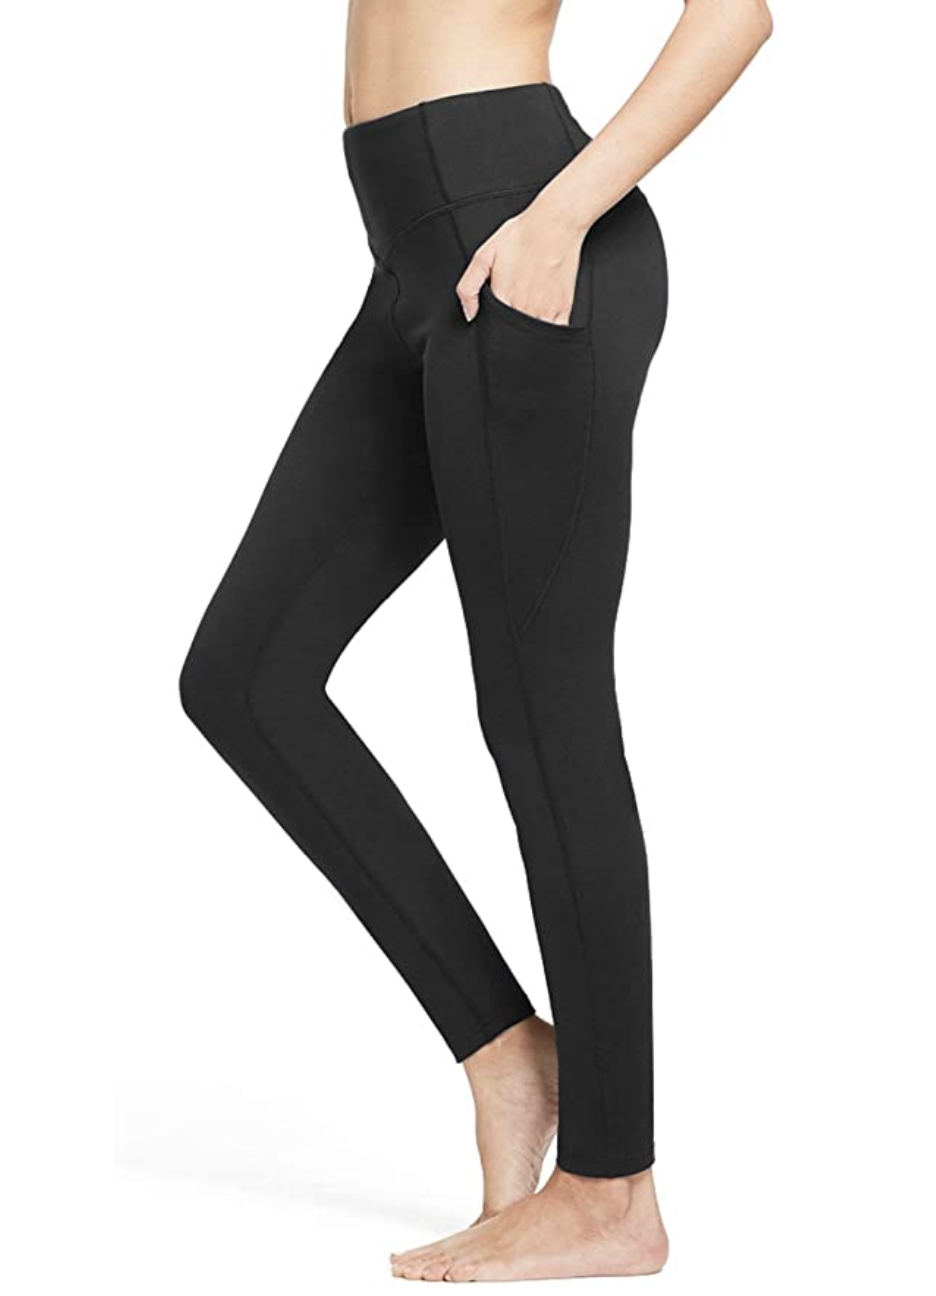 Baleaf Bestselling Leggings Are Fleece-Lined and Winter-Ready